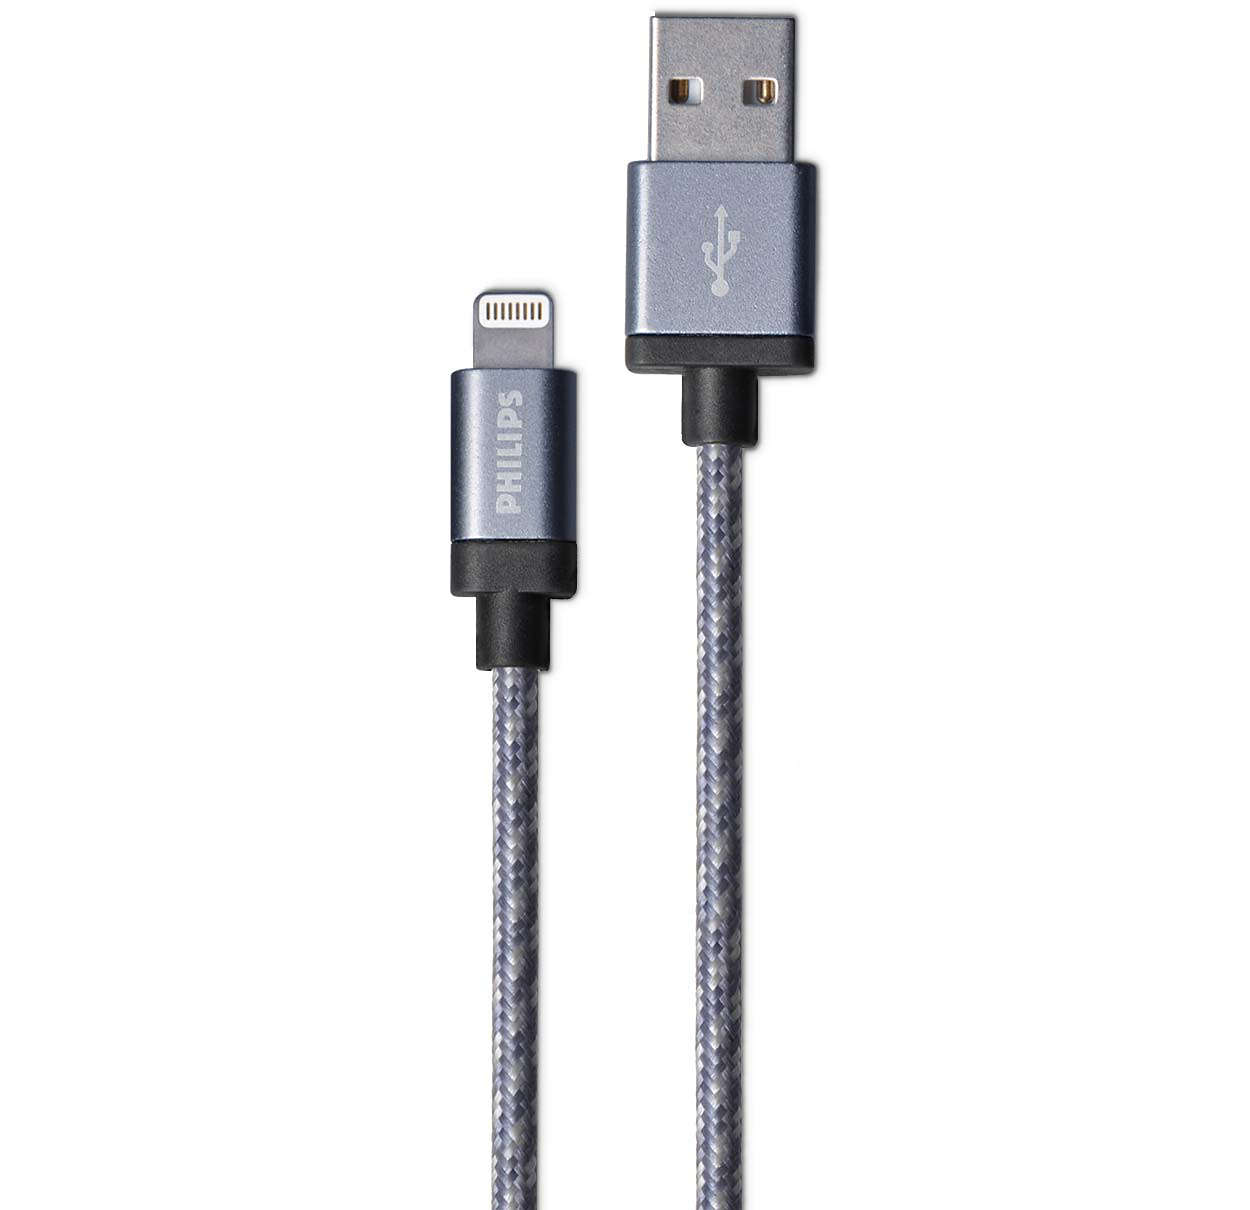 1.2 m iPhone Lightning to USB cable